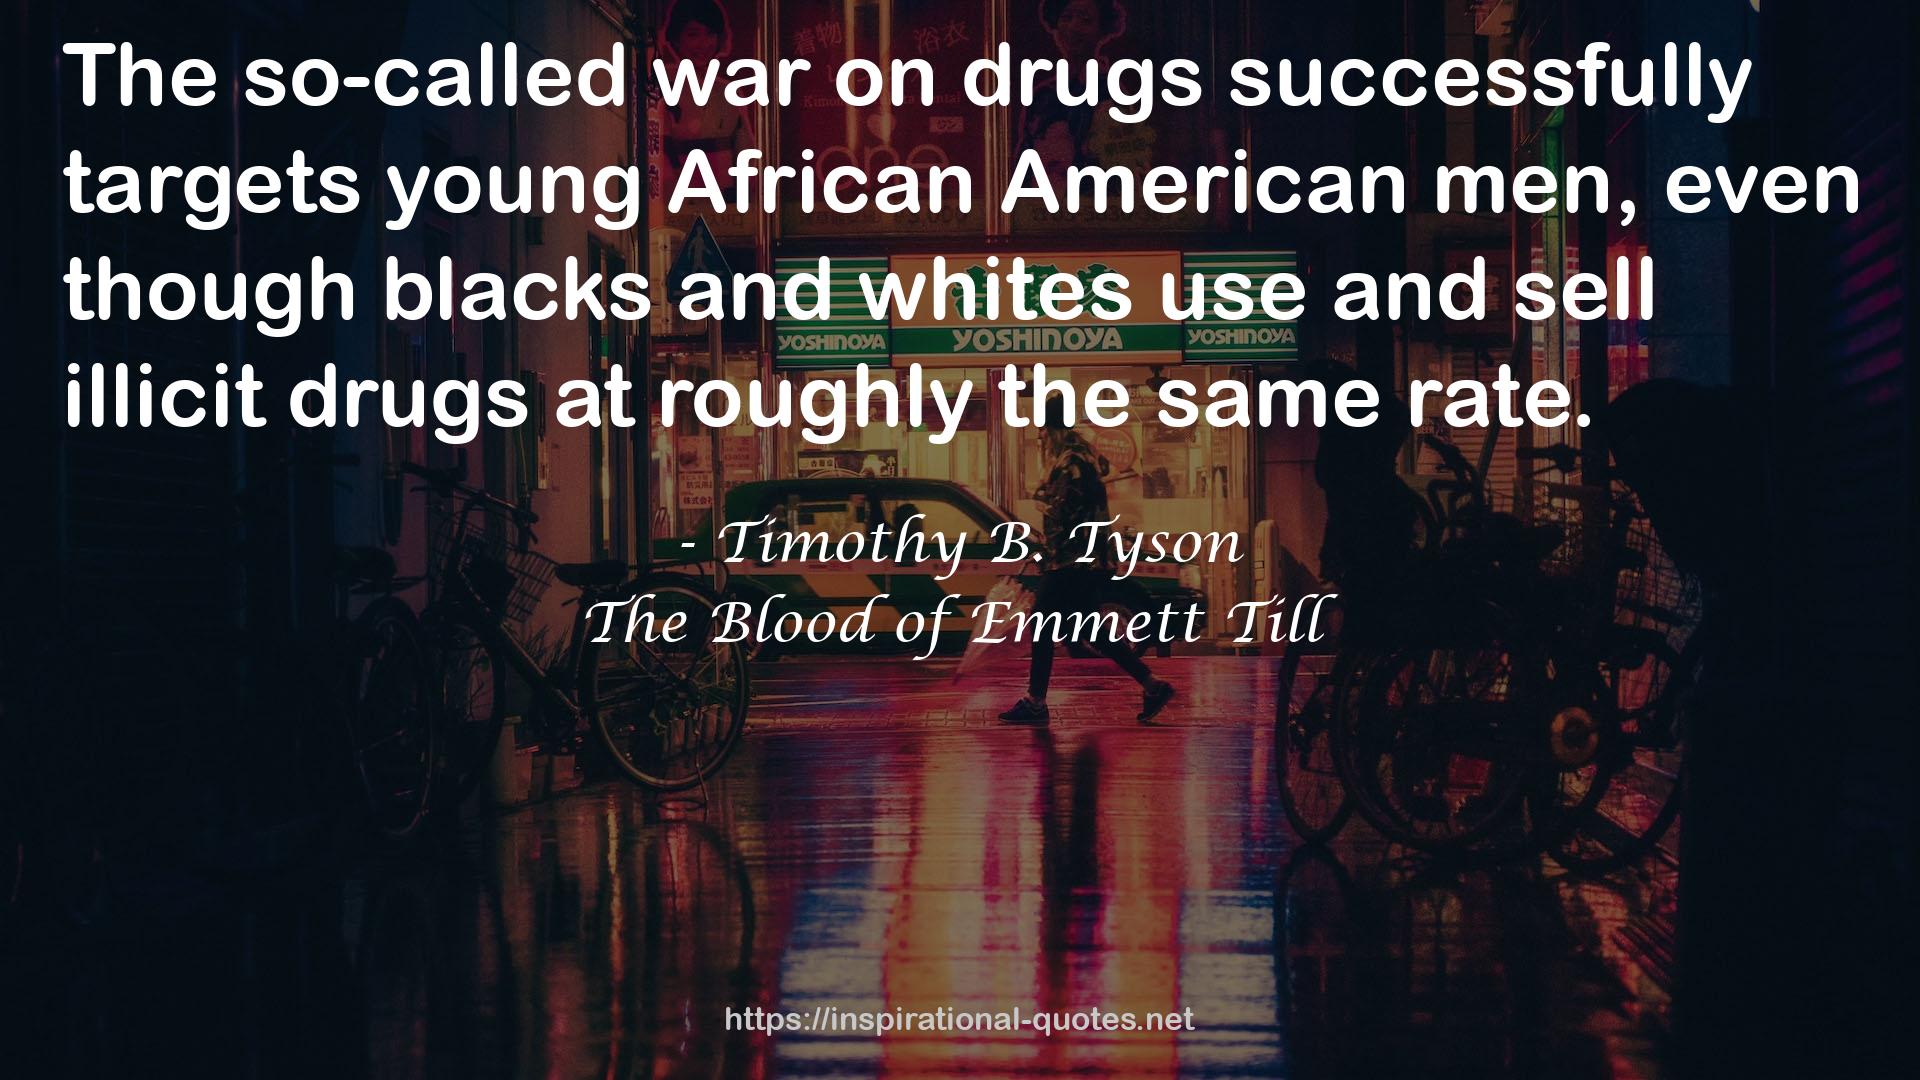 Timothy B. Tyson QUOTES